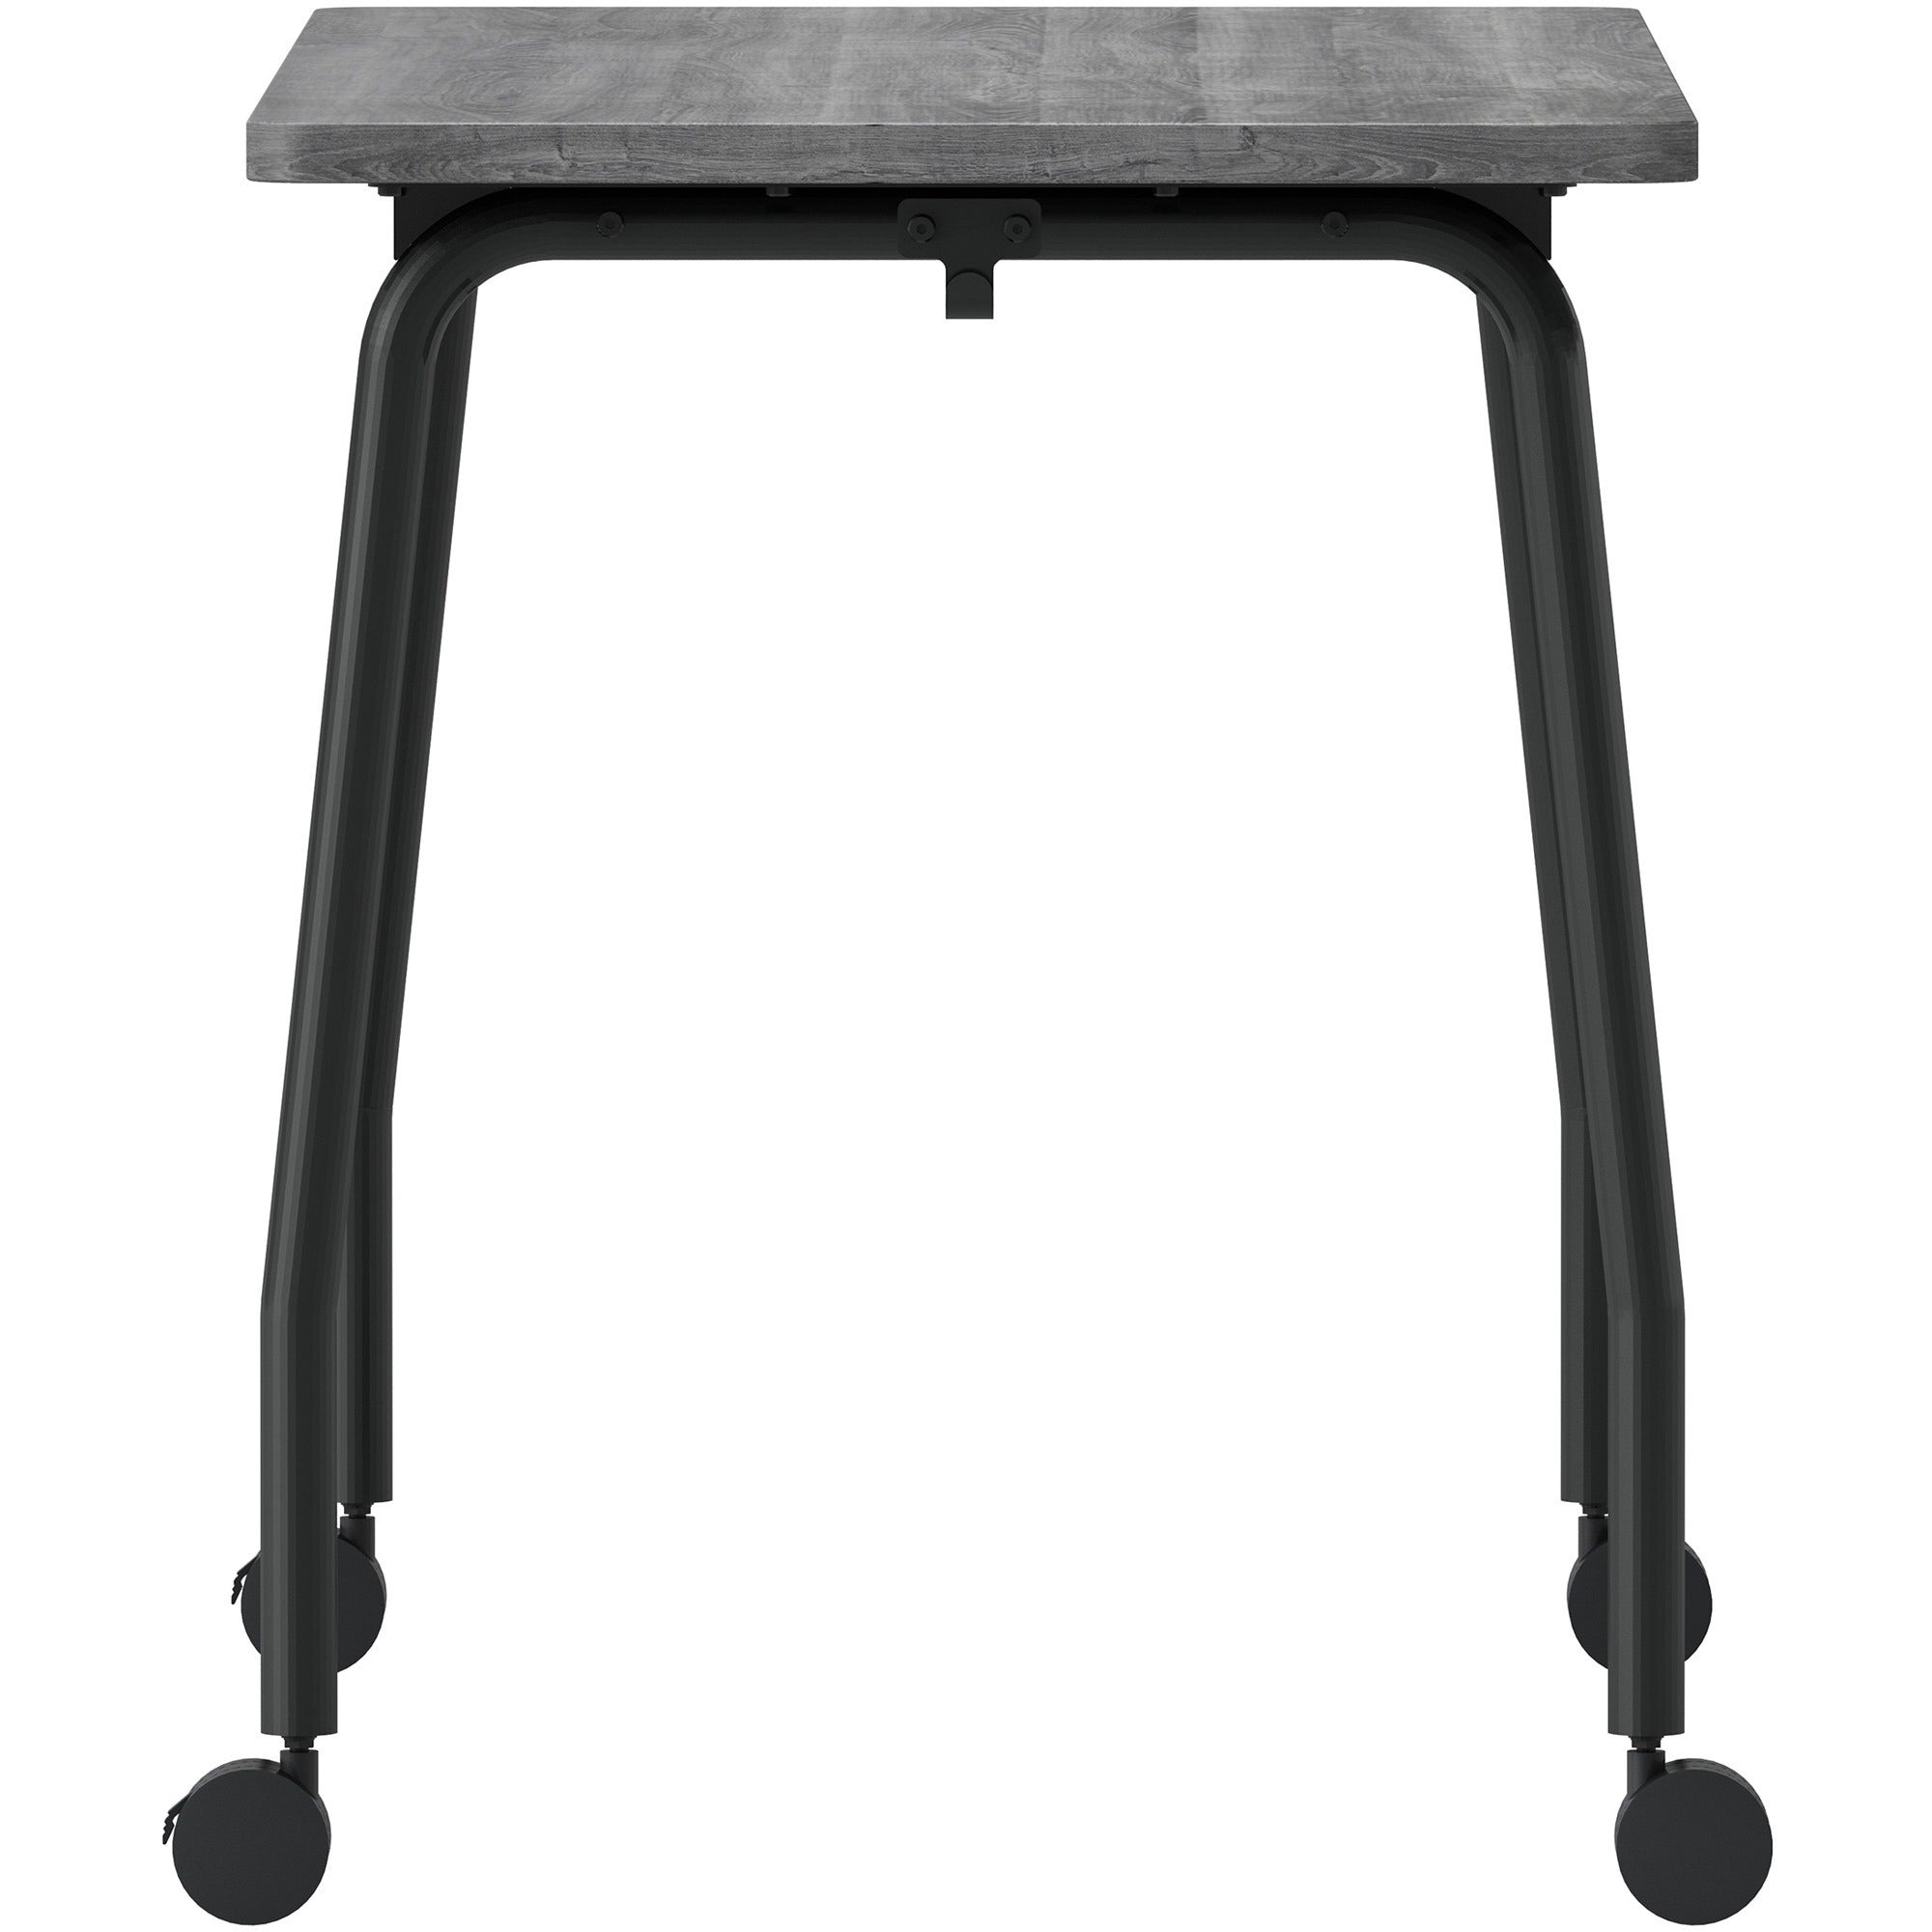 lorell-training-table-for-table-toplaminated-top-300-lb-capacity-2950-table-top-length-x-2363-table-top-width-x-1-table-top-thickness-59-height-assembly-required-weathered-charcoal-particleboard-top-material-1-each_llr60846 - 5